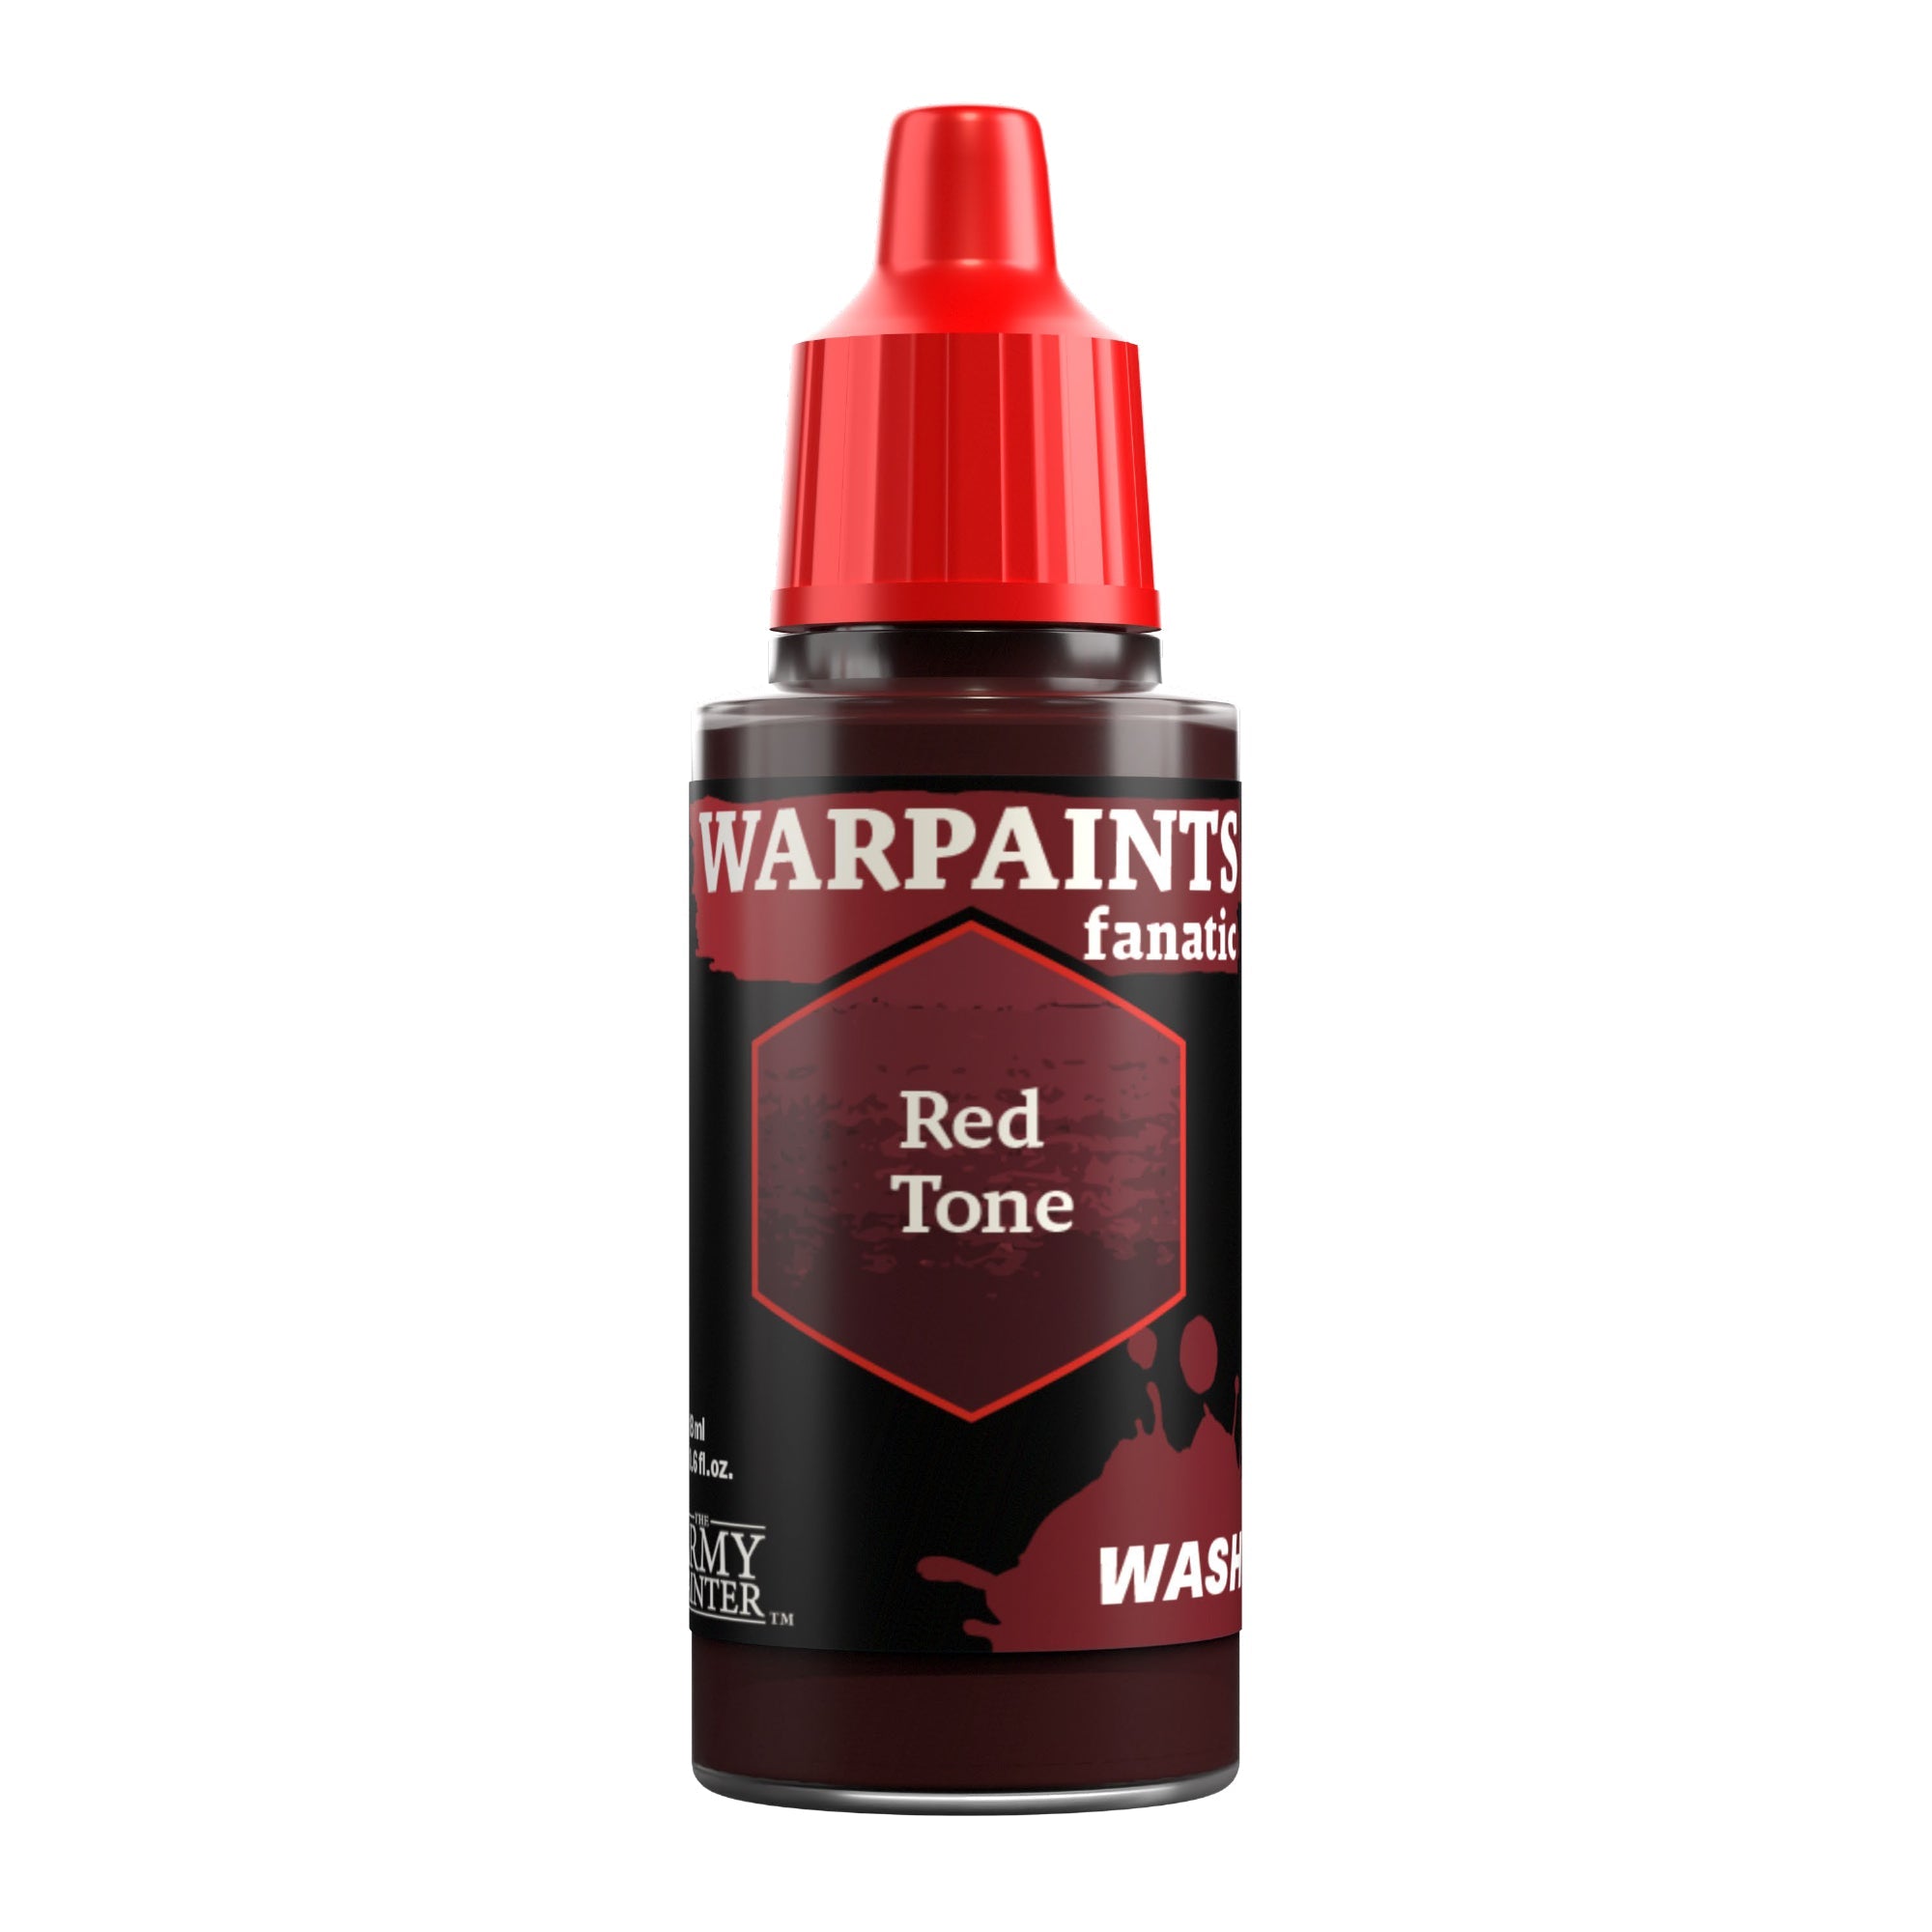 Warpaints Fanatic: Wash - Red Tone 18ml | CCGPrime